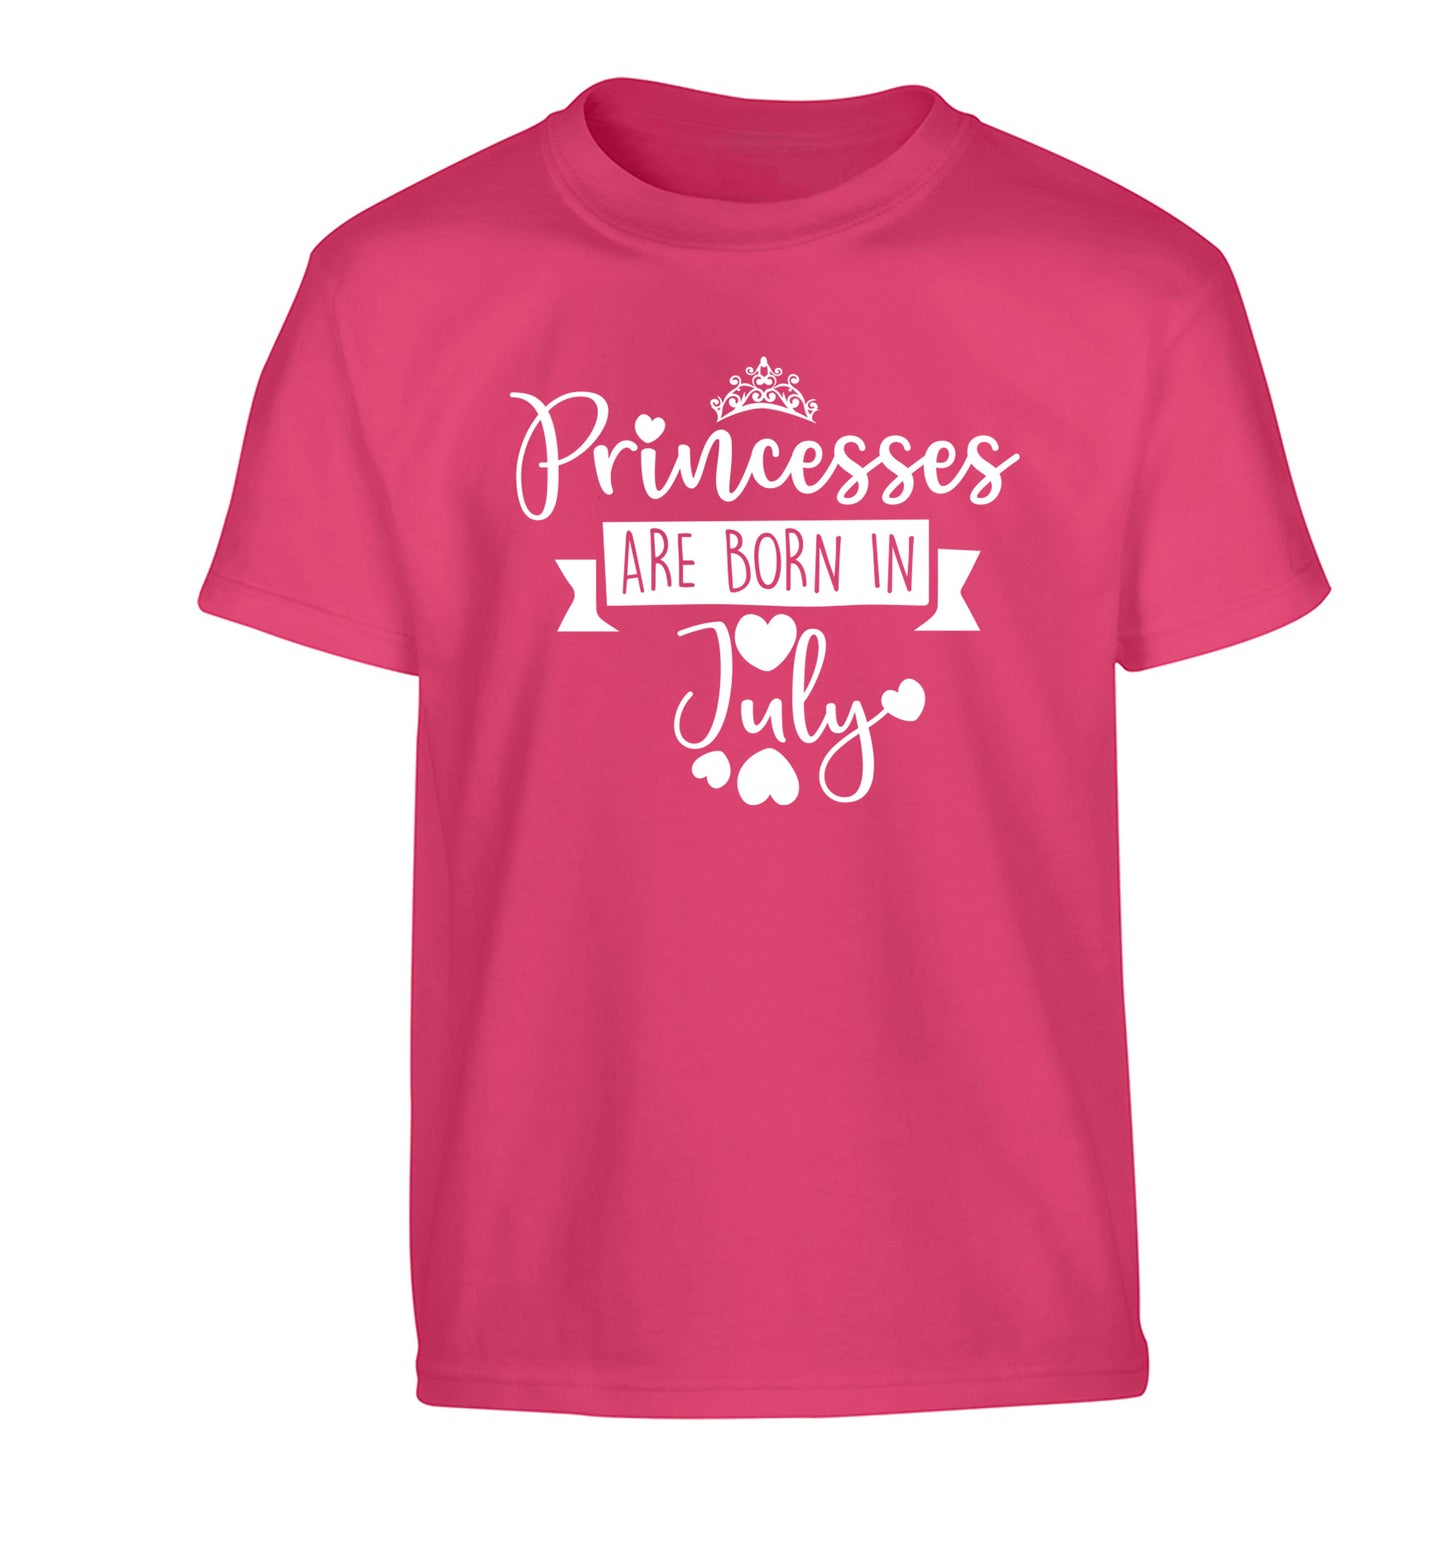 Princesses are born in July Children's pink Tshirt 12-13 Years